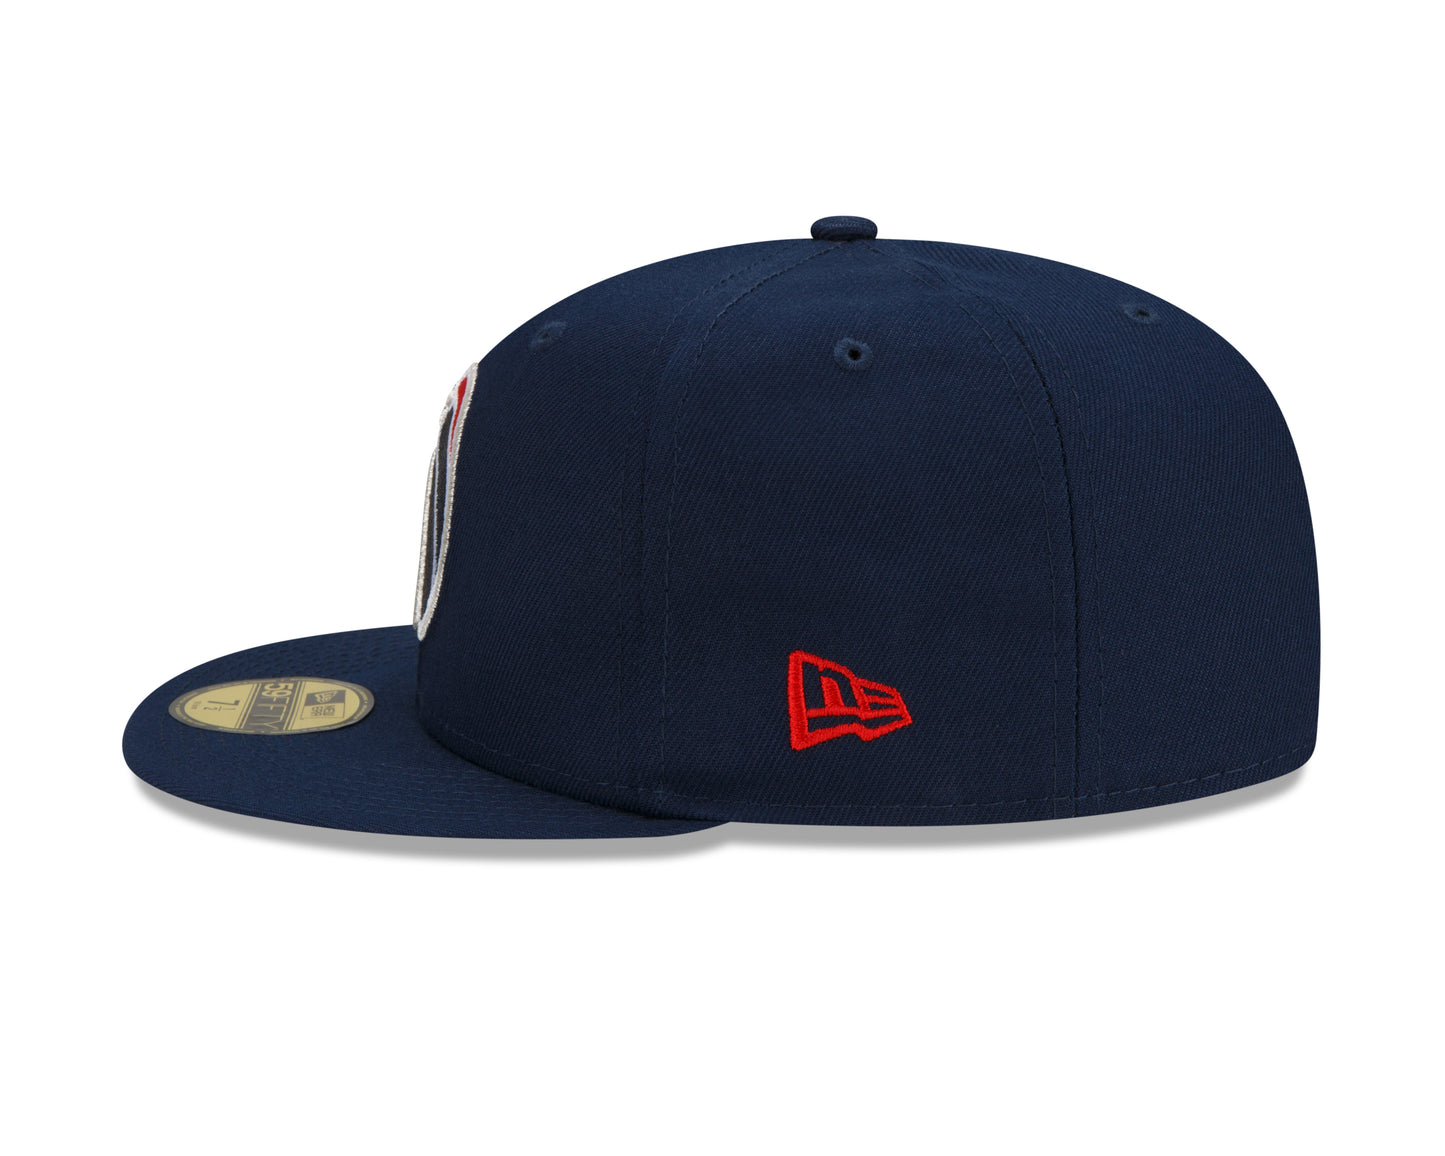 Washington Wizards New Era Team Color Back Half 59fifty Fitted Hat